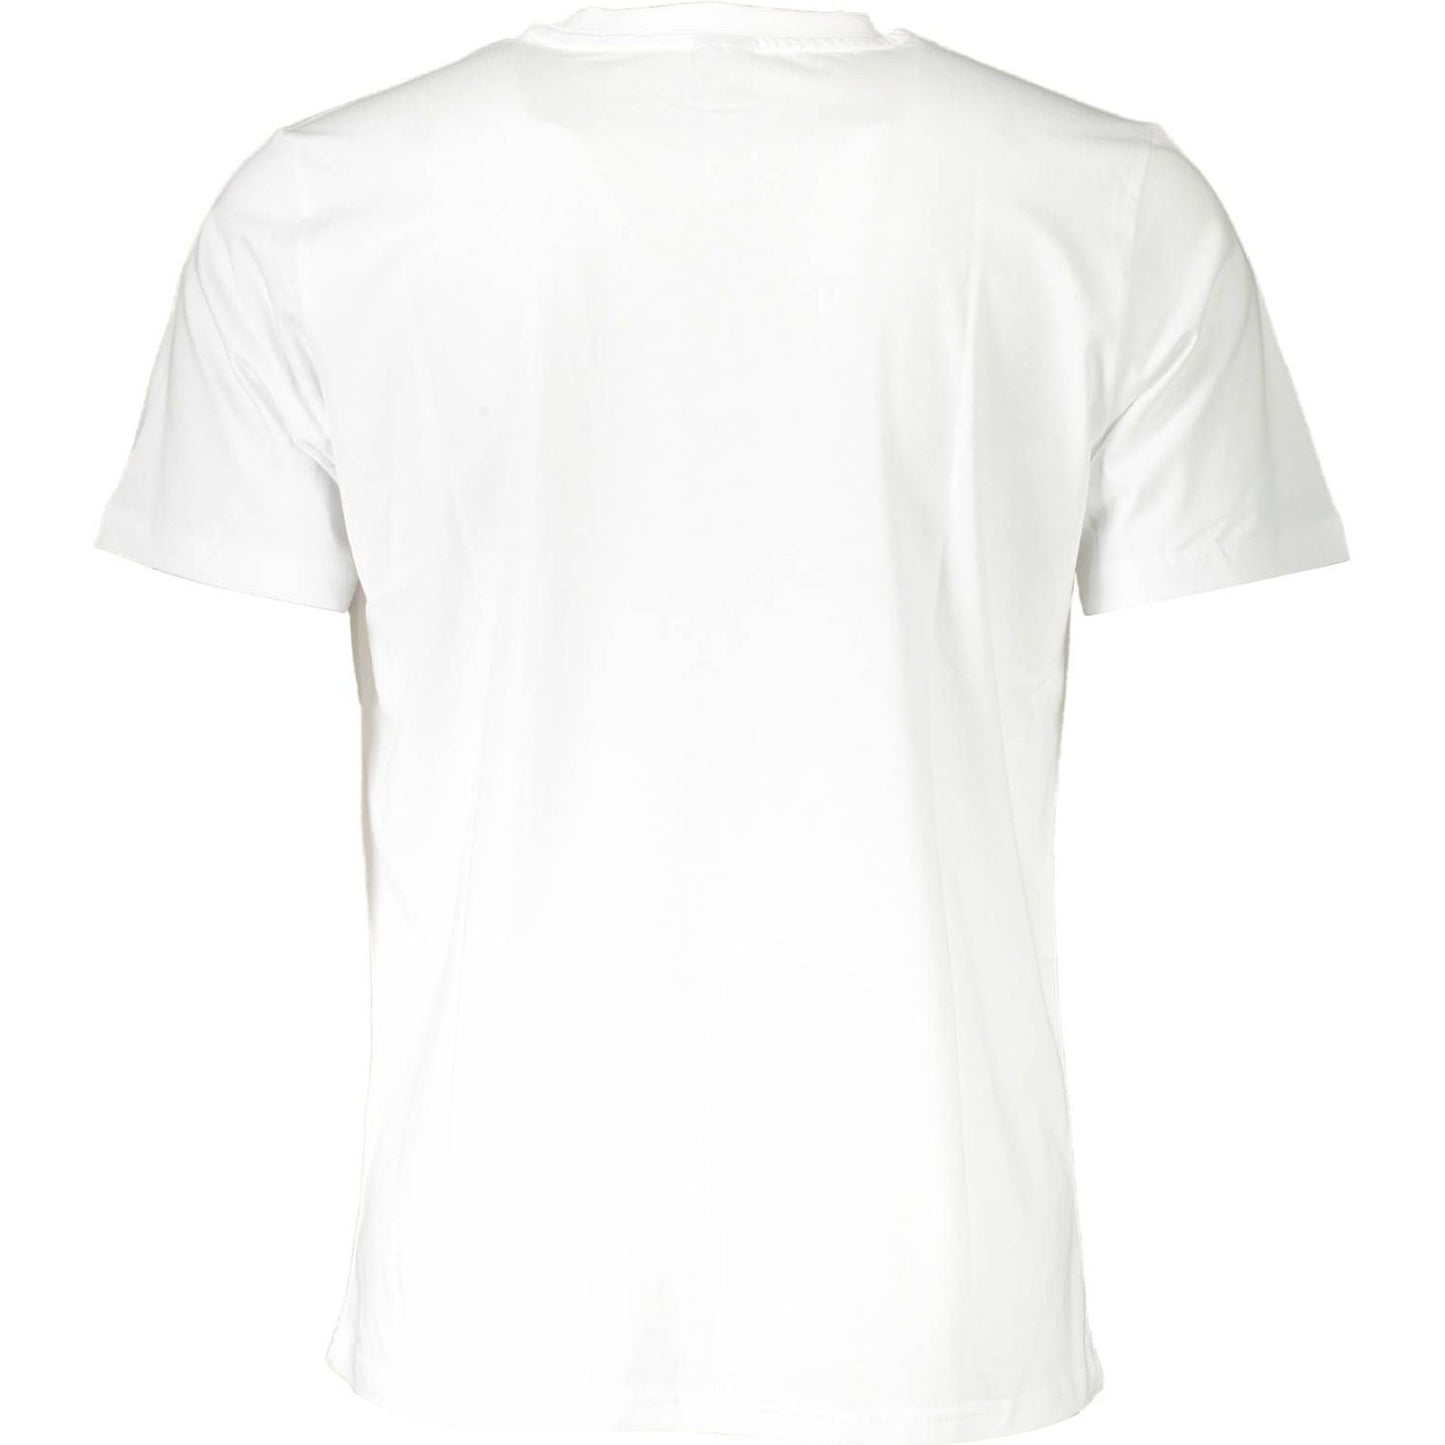 North Sails Chic White Cotton Tee with Logo Accent chic-white-cotton-tee-with-logo-accent